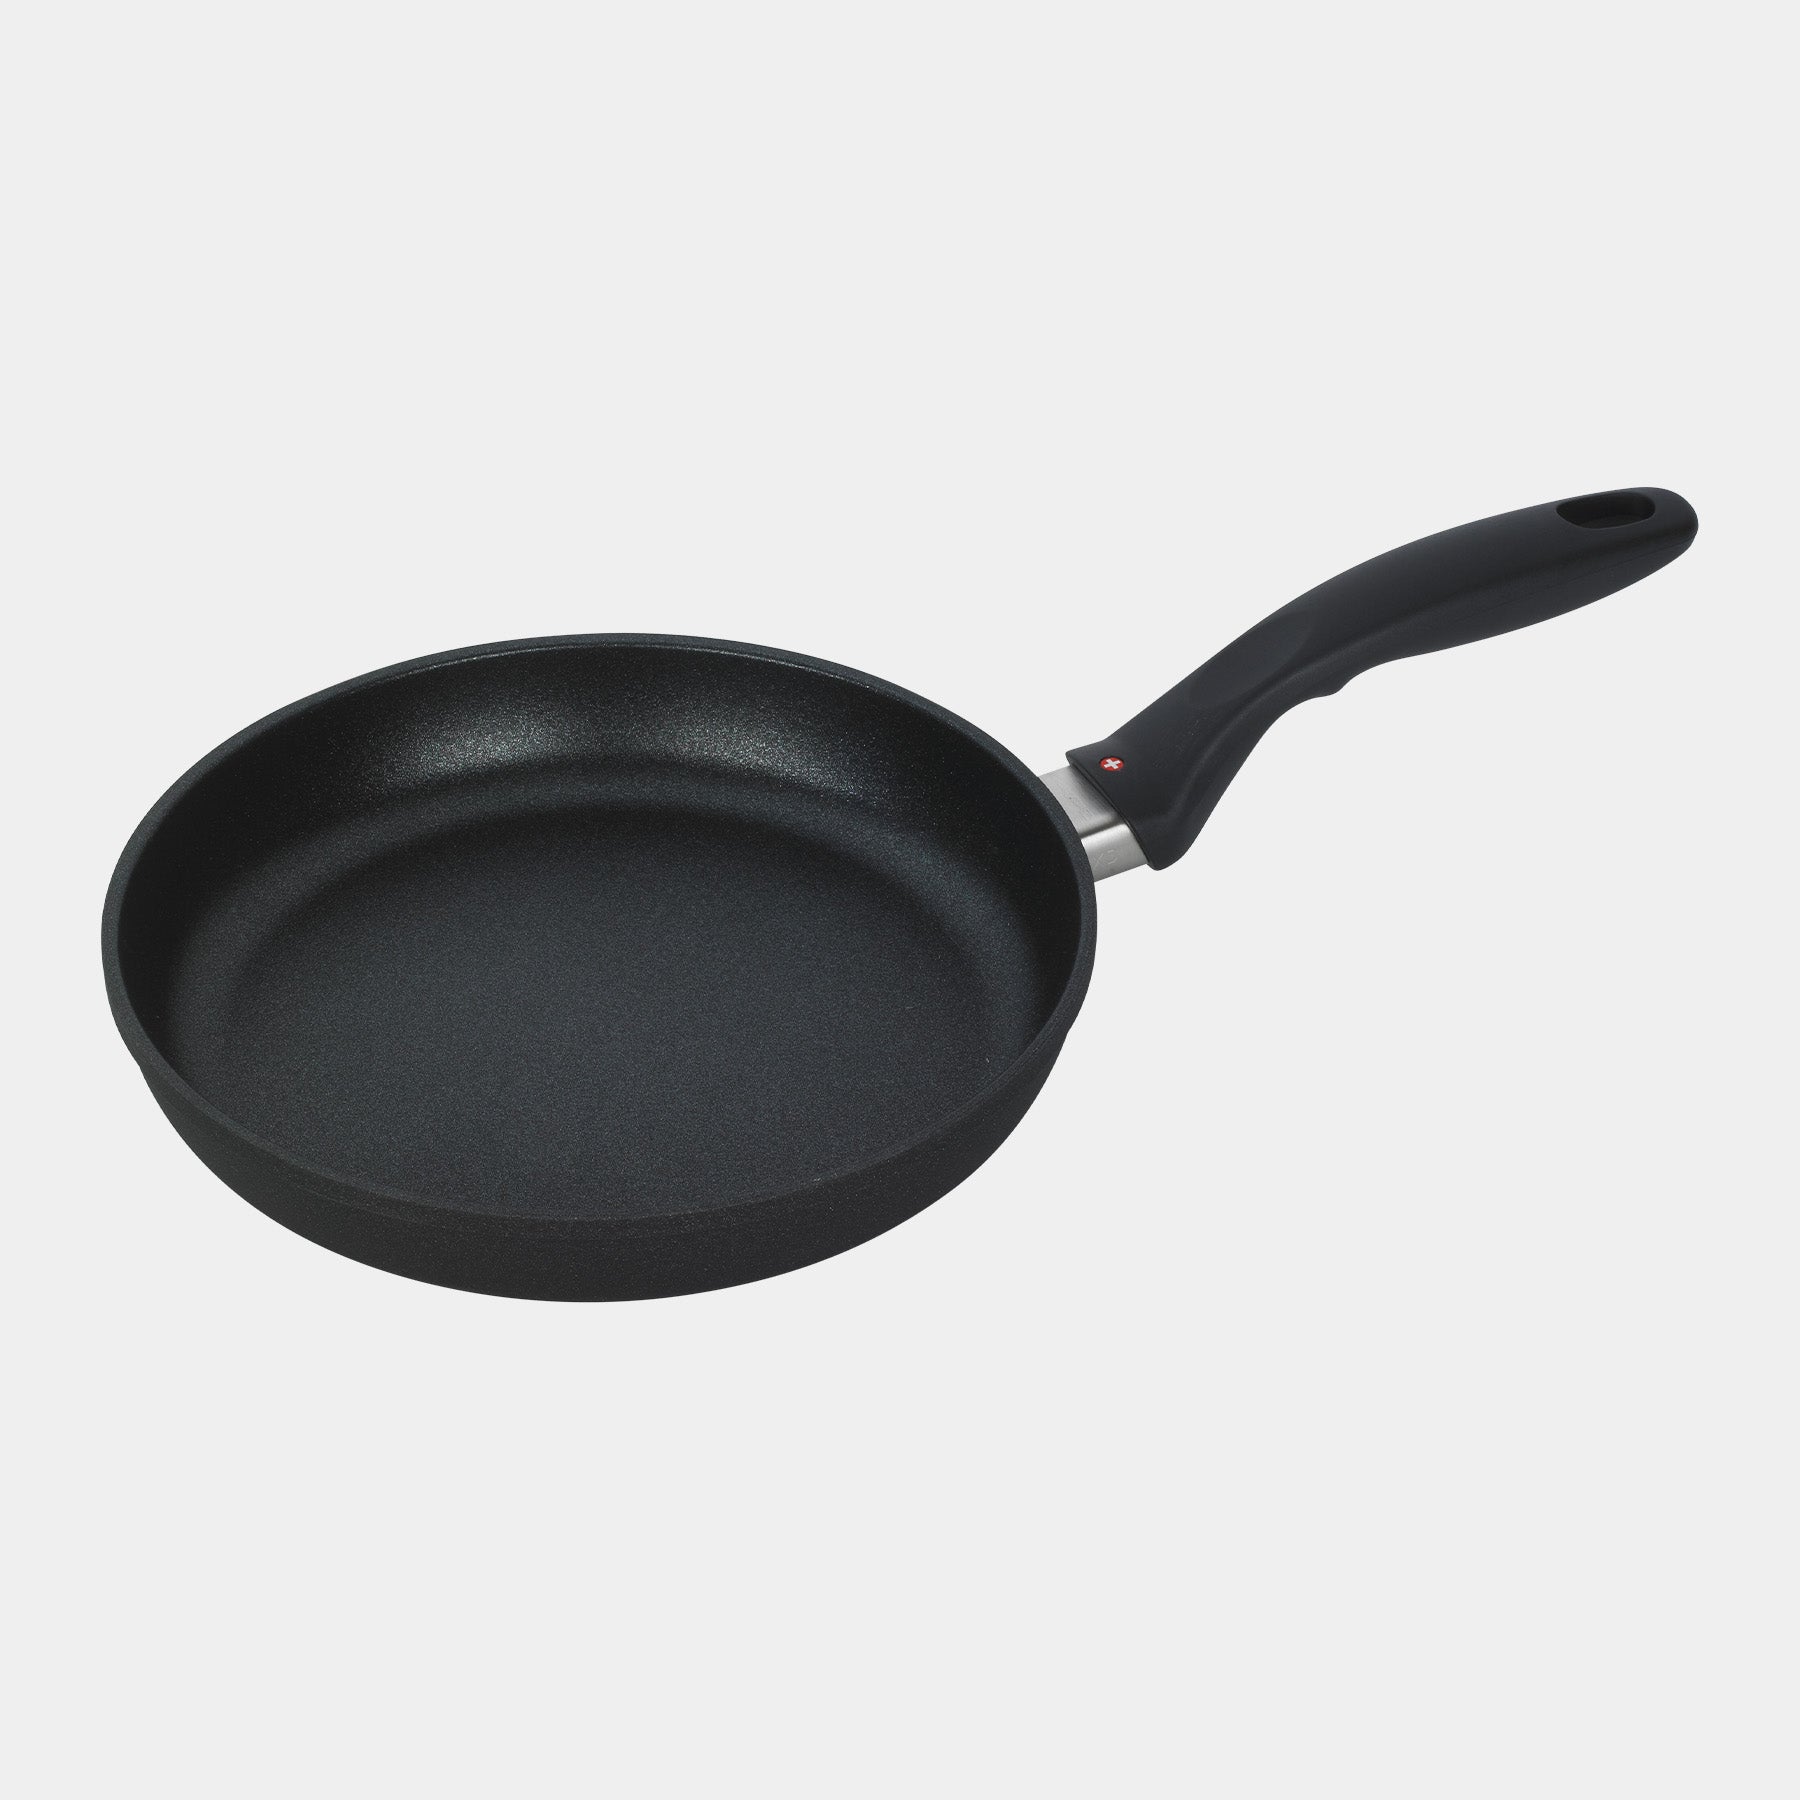 XD Nonstick 9.5" Fry Pan - Induction top view